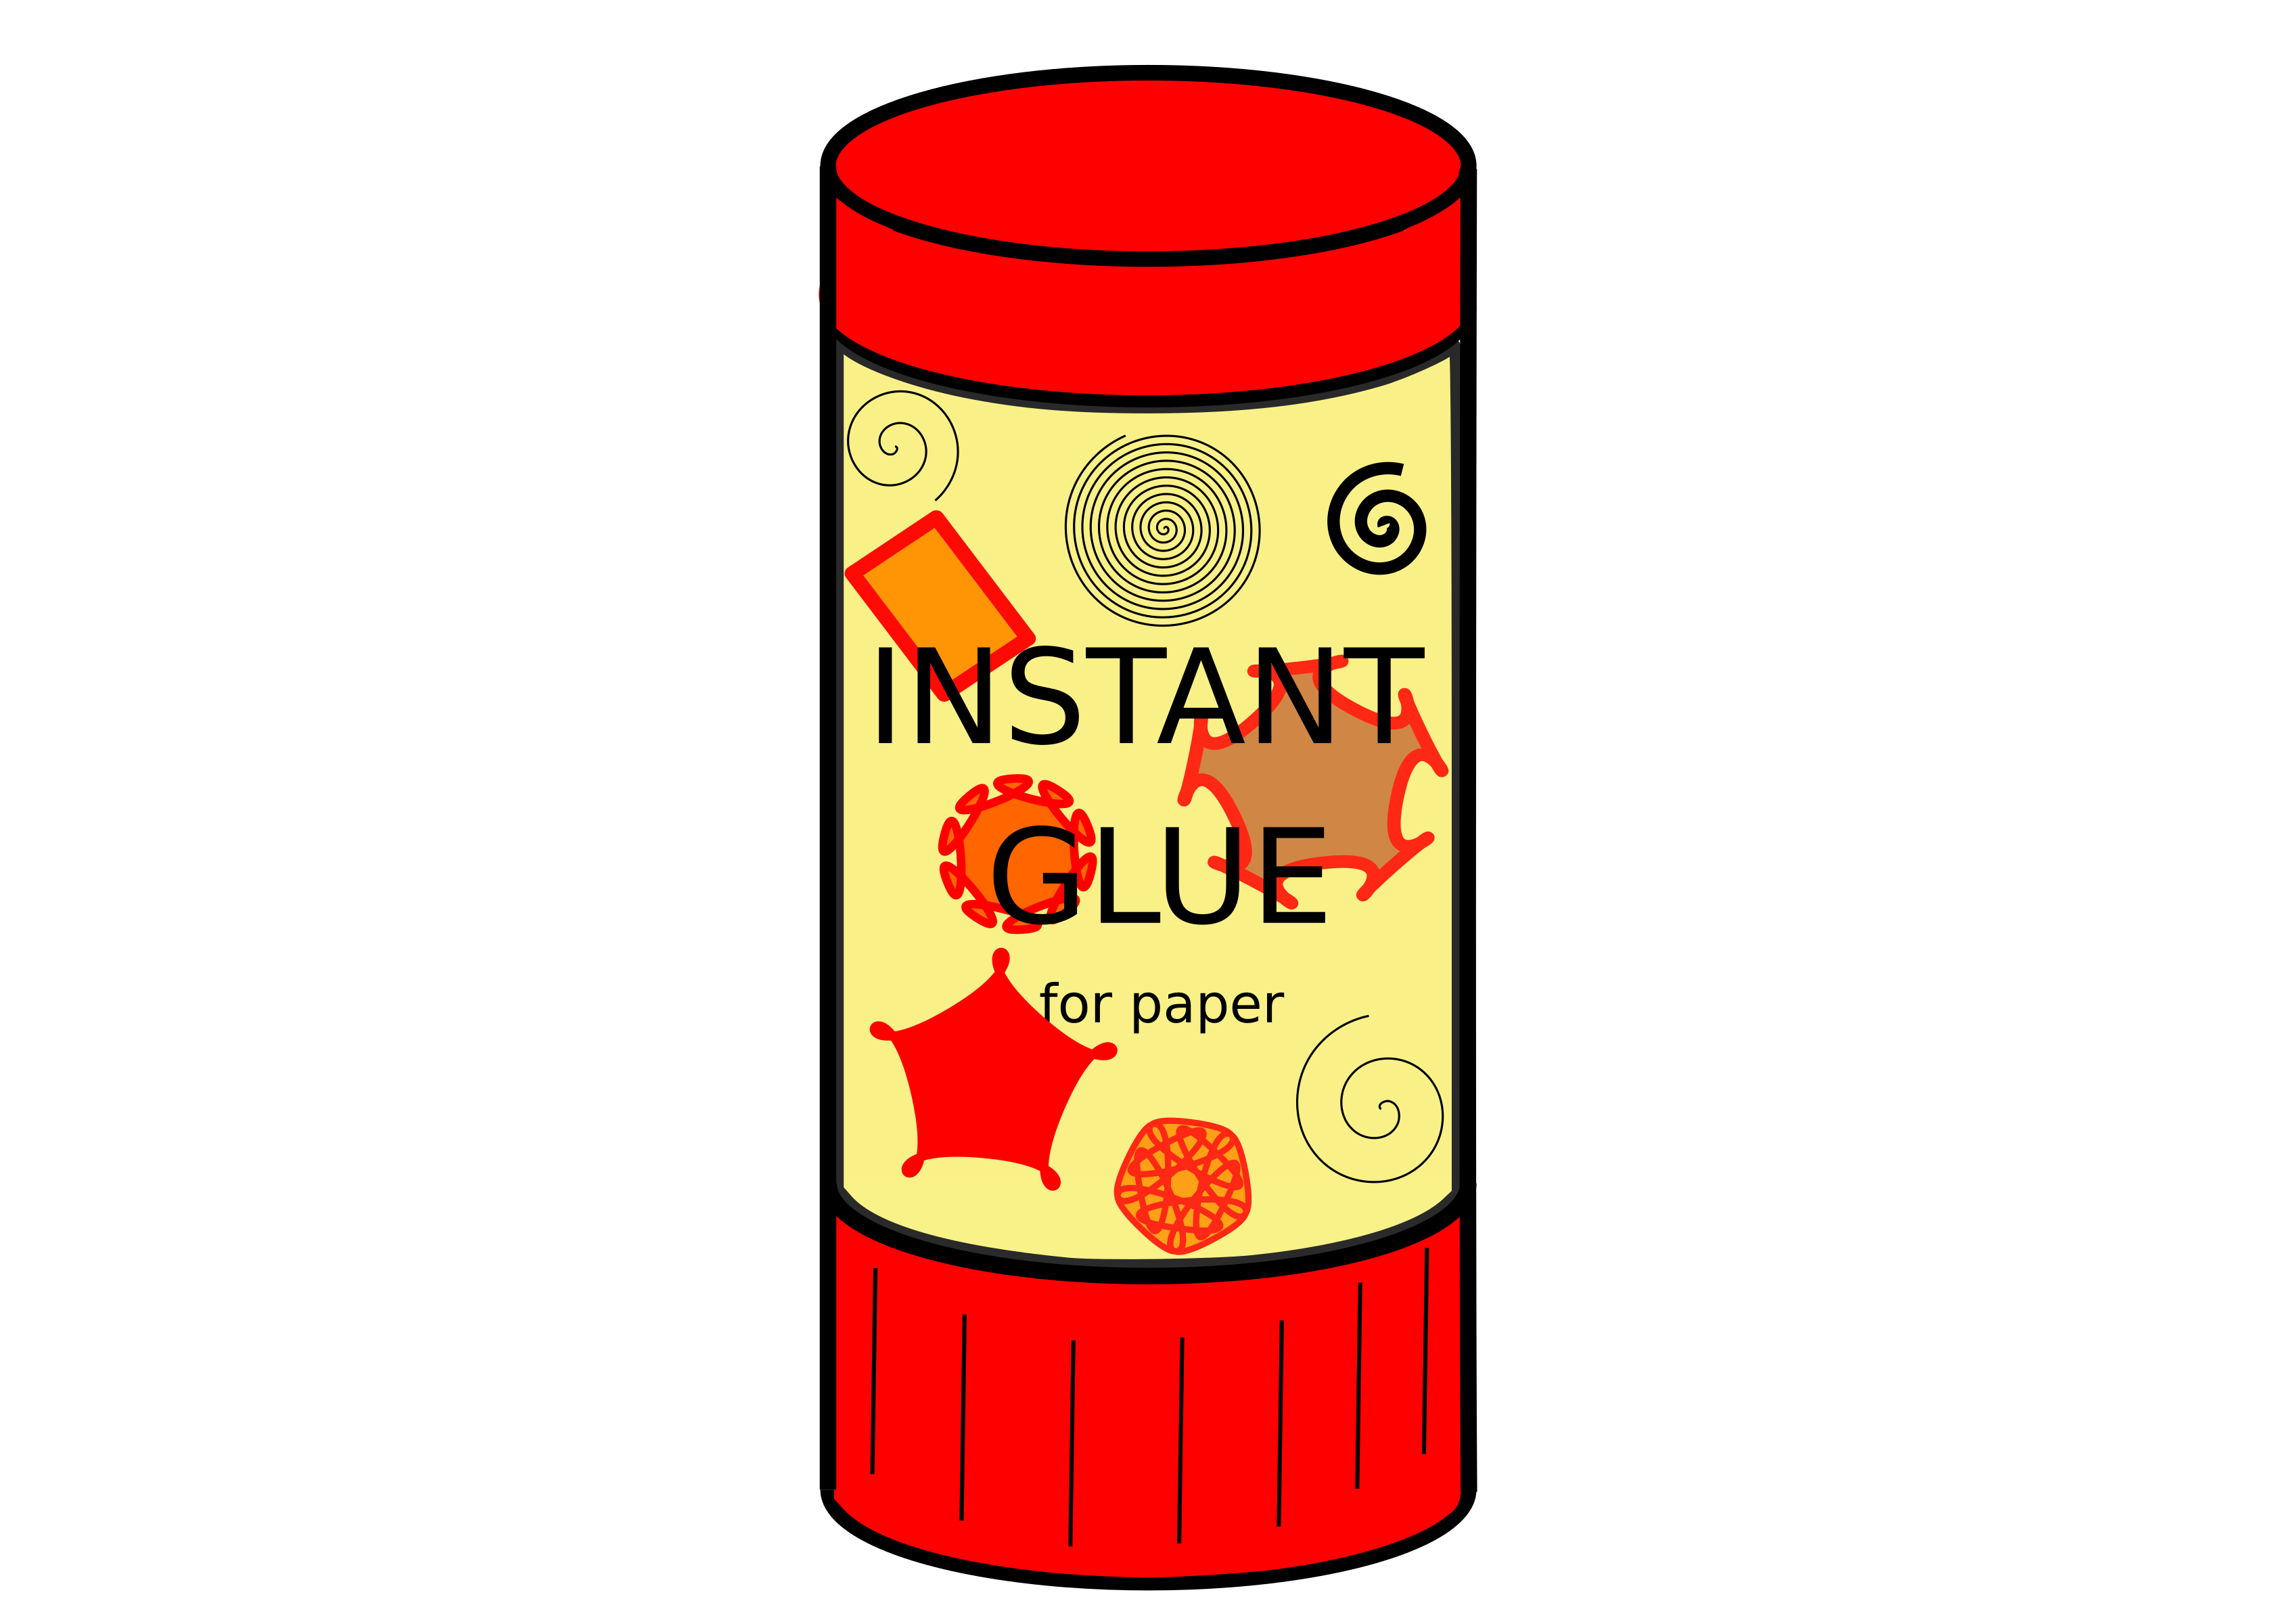 Glue Picture Free Transparent Image HQ PNG Image. 